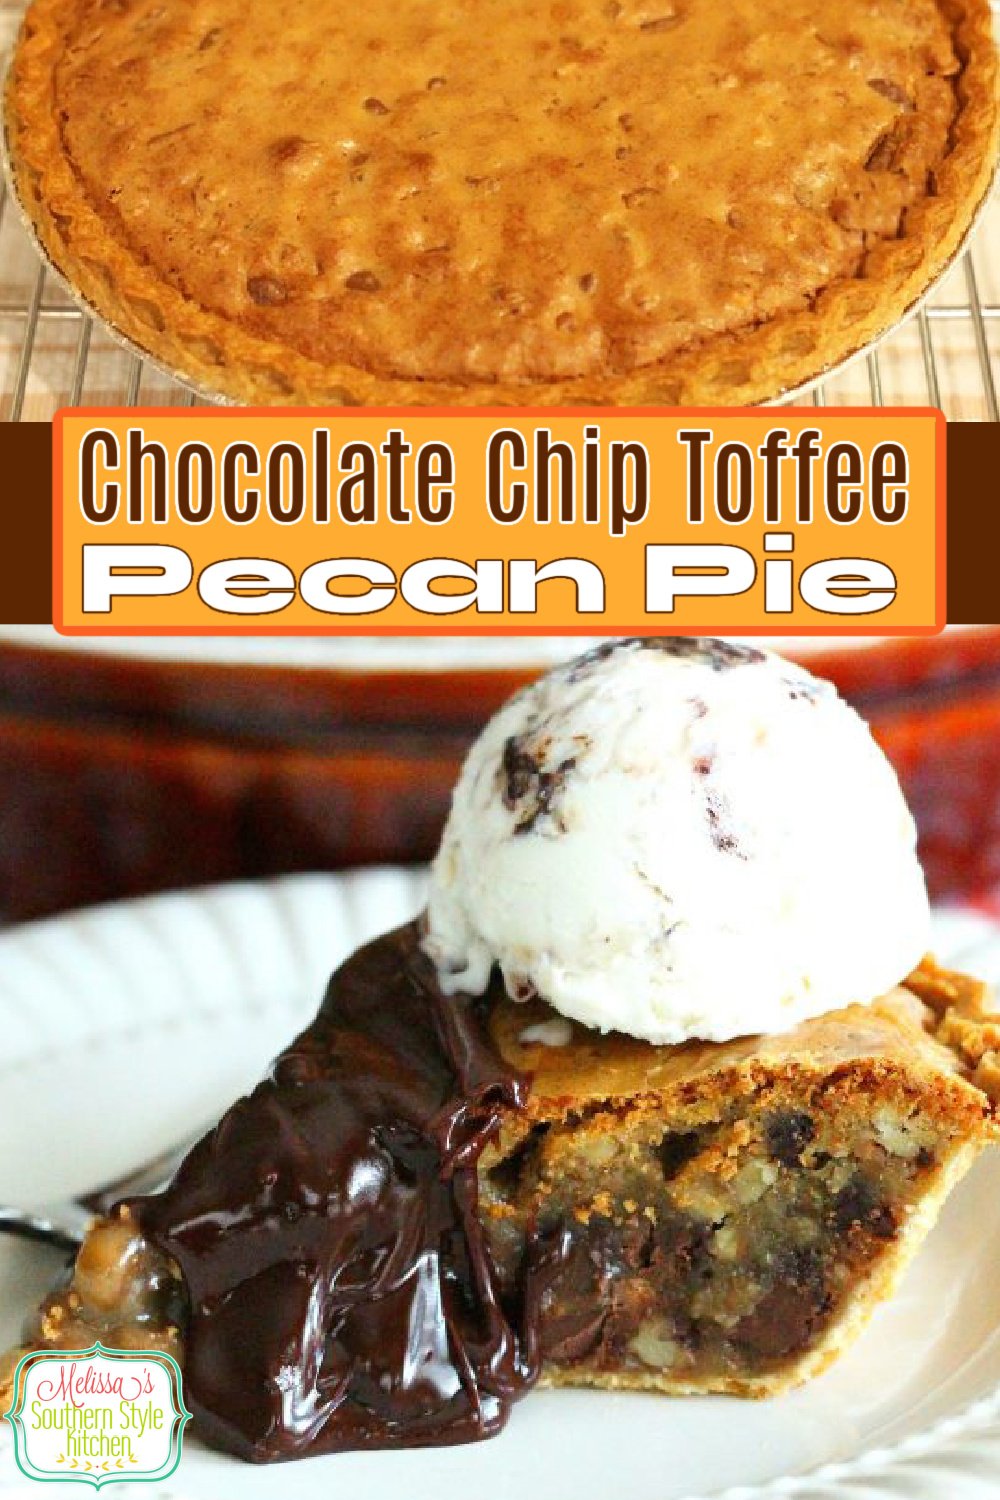 Serve this Chocolate Chip Toffee Pecan Pie warm with vanilla ice cream or whipped cream. #pecanpie #chocolatepecanpie #pecanpierecipes #pies #desserts #dessertfoodrecipes #southernfood #holidaydesserts #southernrecipes via @melissasssk